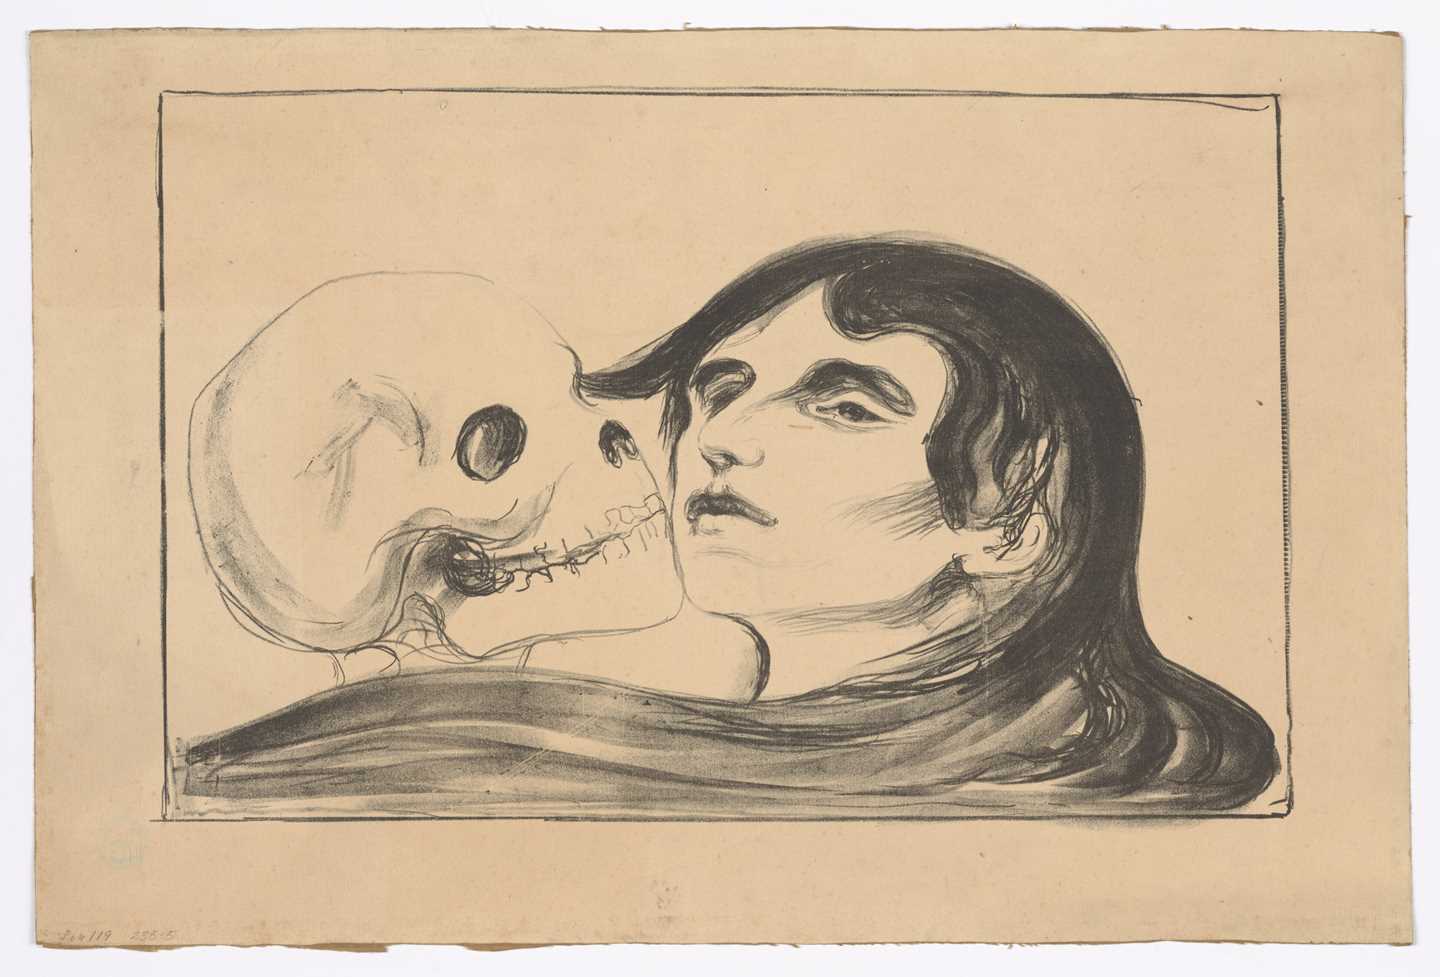 Edvard Munch: The Kiss of Death. Lithography, 1899. Photo © Munchmuseet